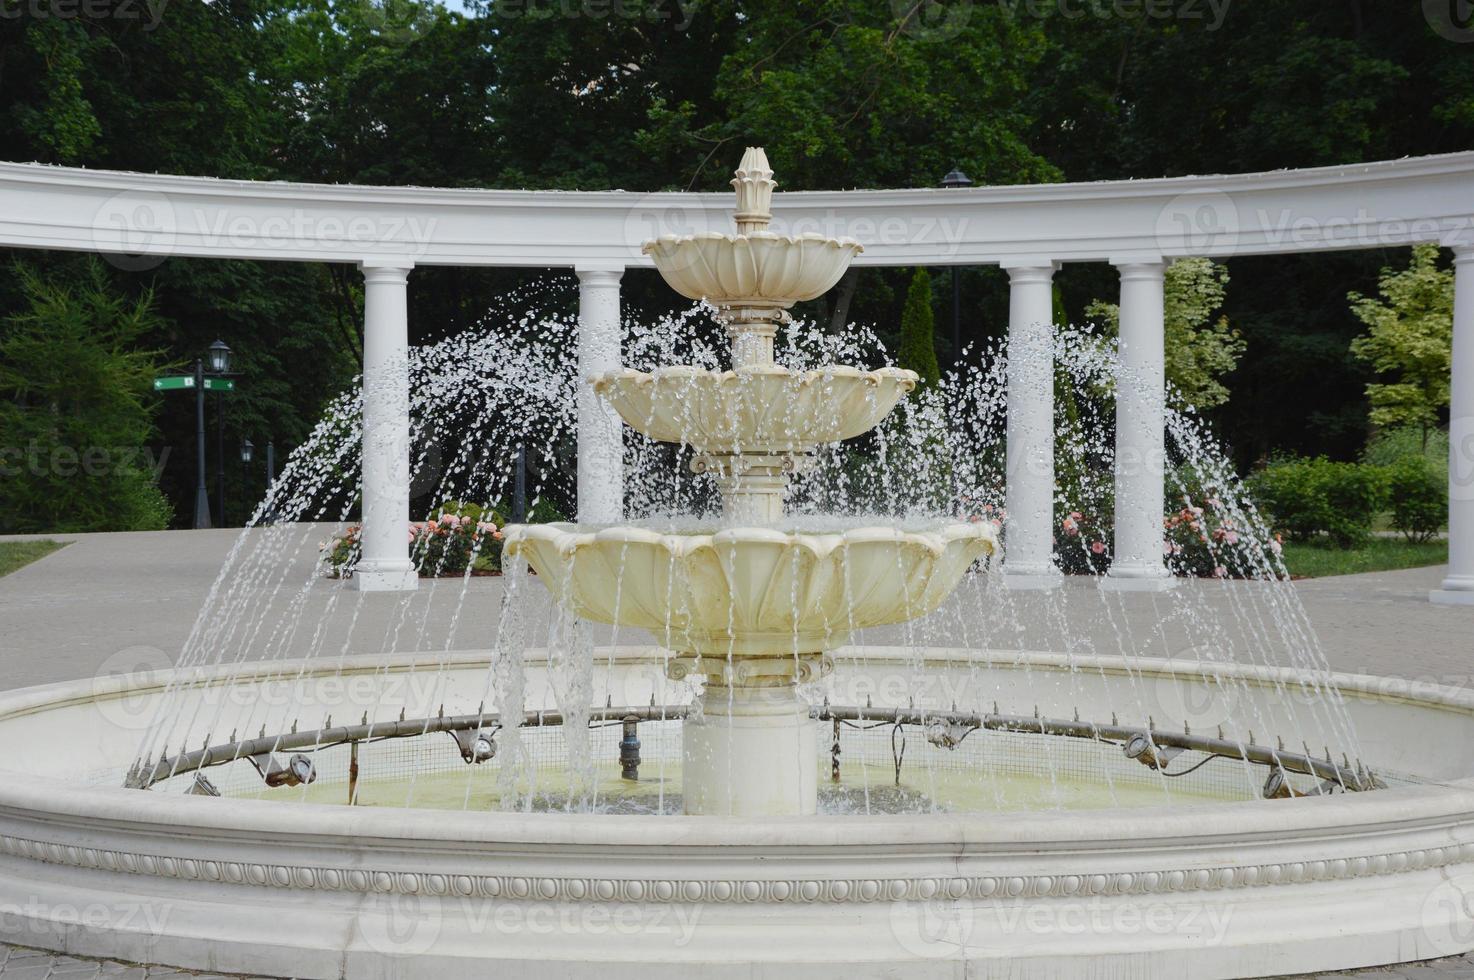 A working fountain in a city park against the backdrop of columns and green trees on a sunny summer day. photo